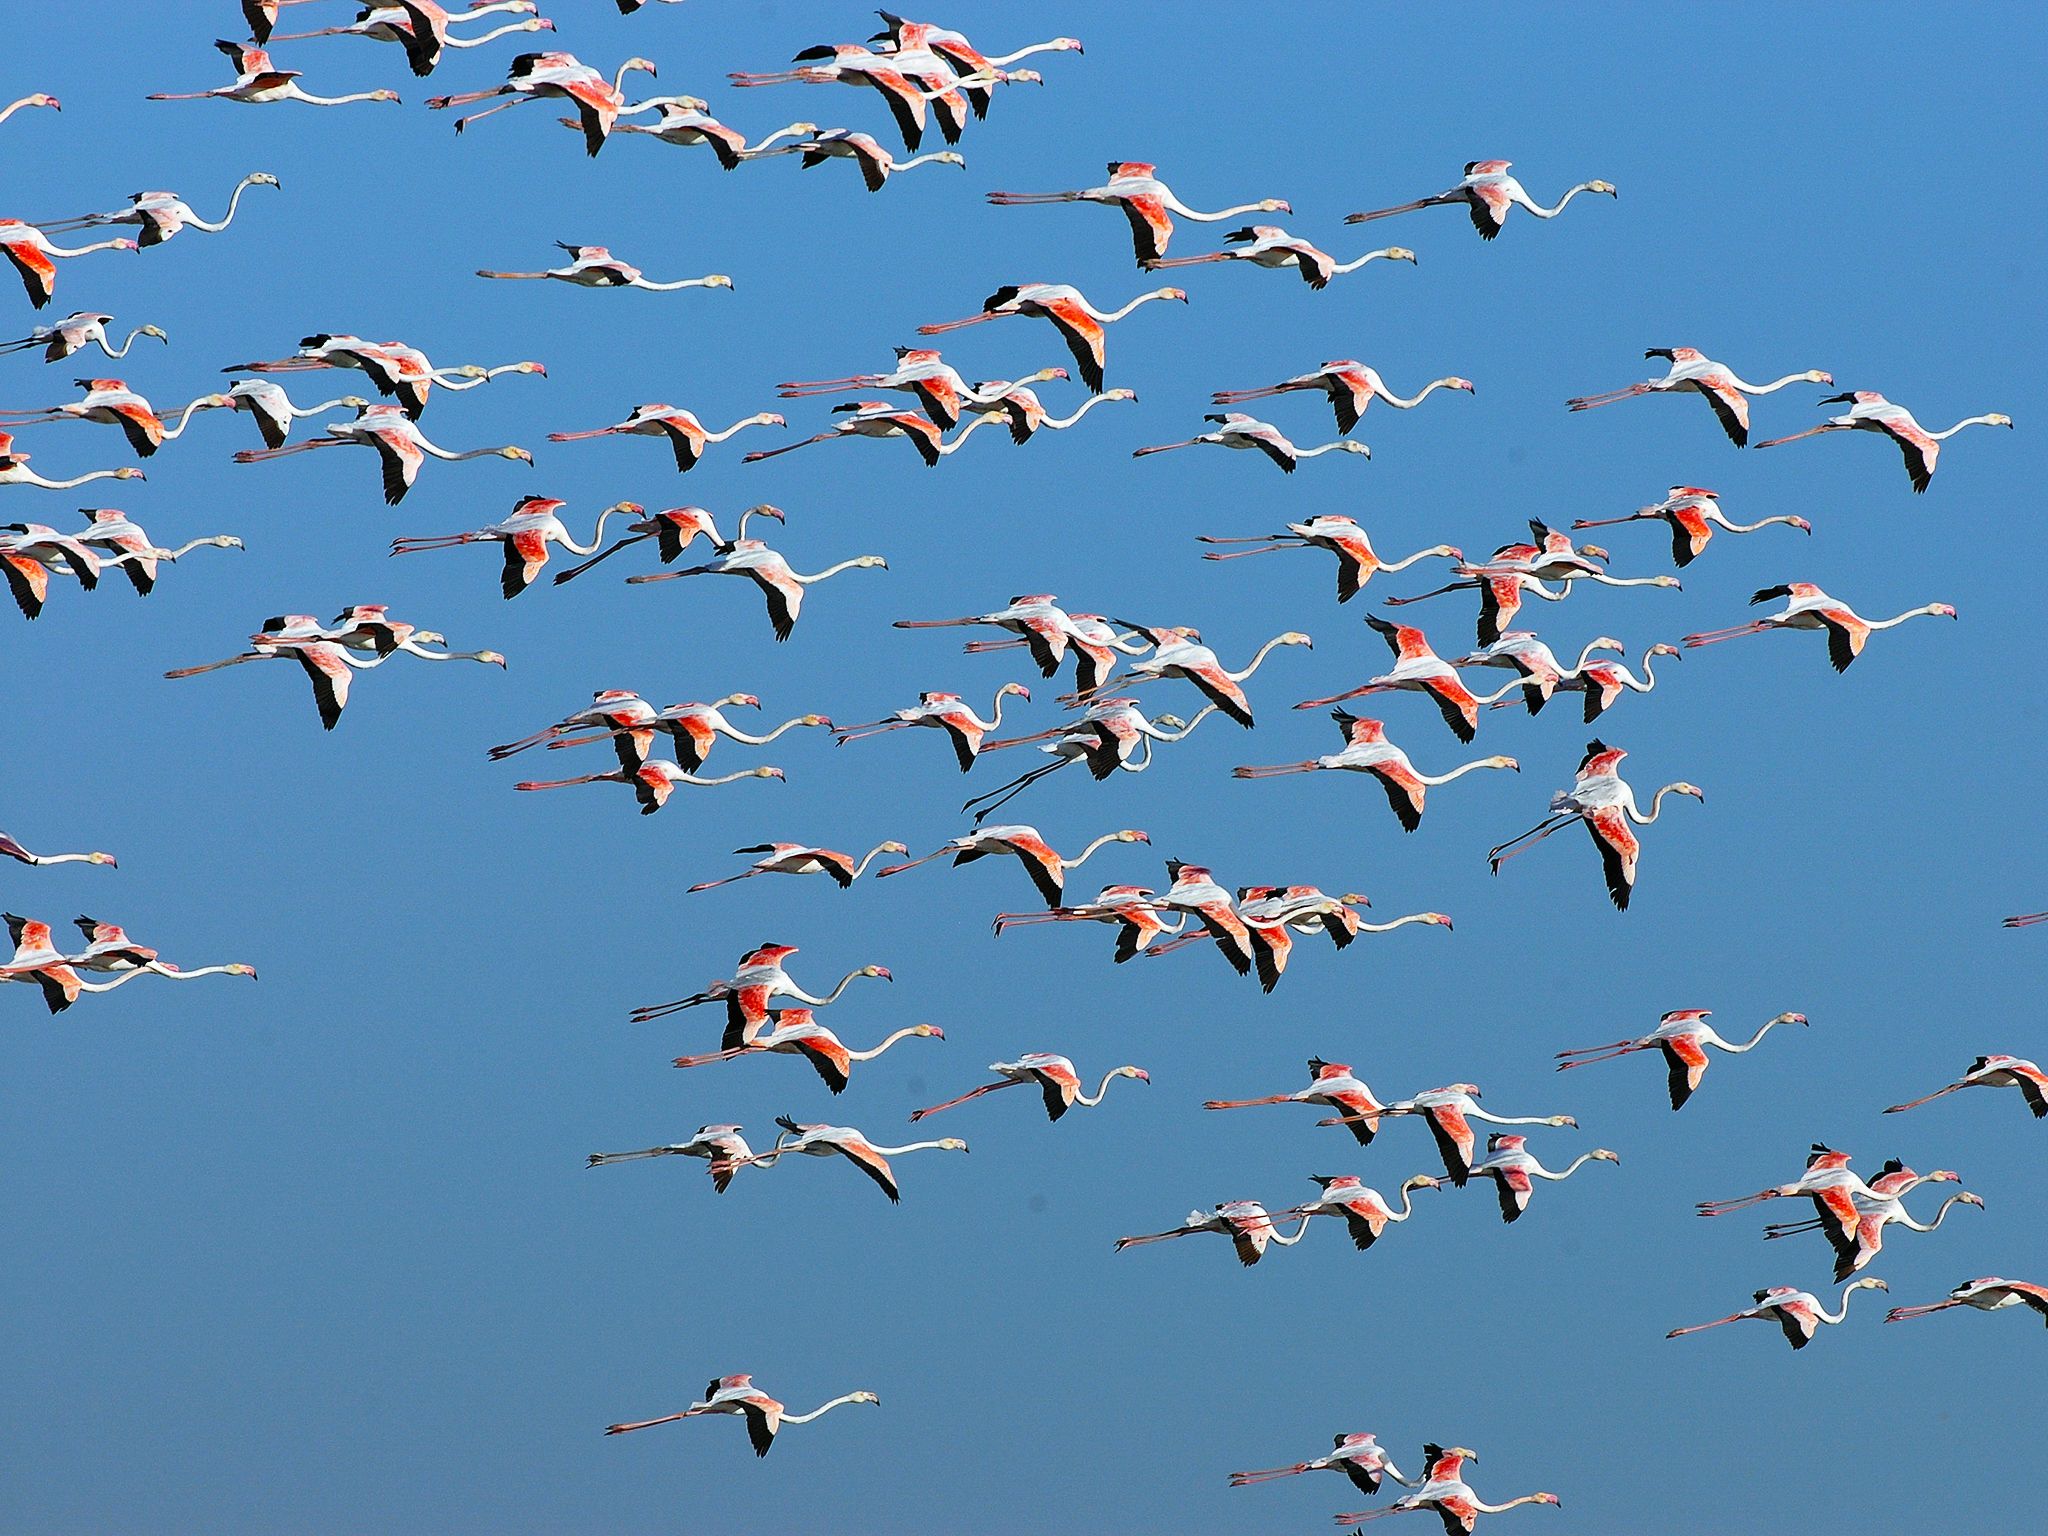 Spain: A group of vibrantly coloured flamingos takes flight in the Doñana region. These nomads... [Photo of the day - December 2014]